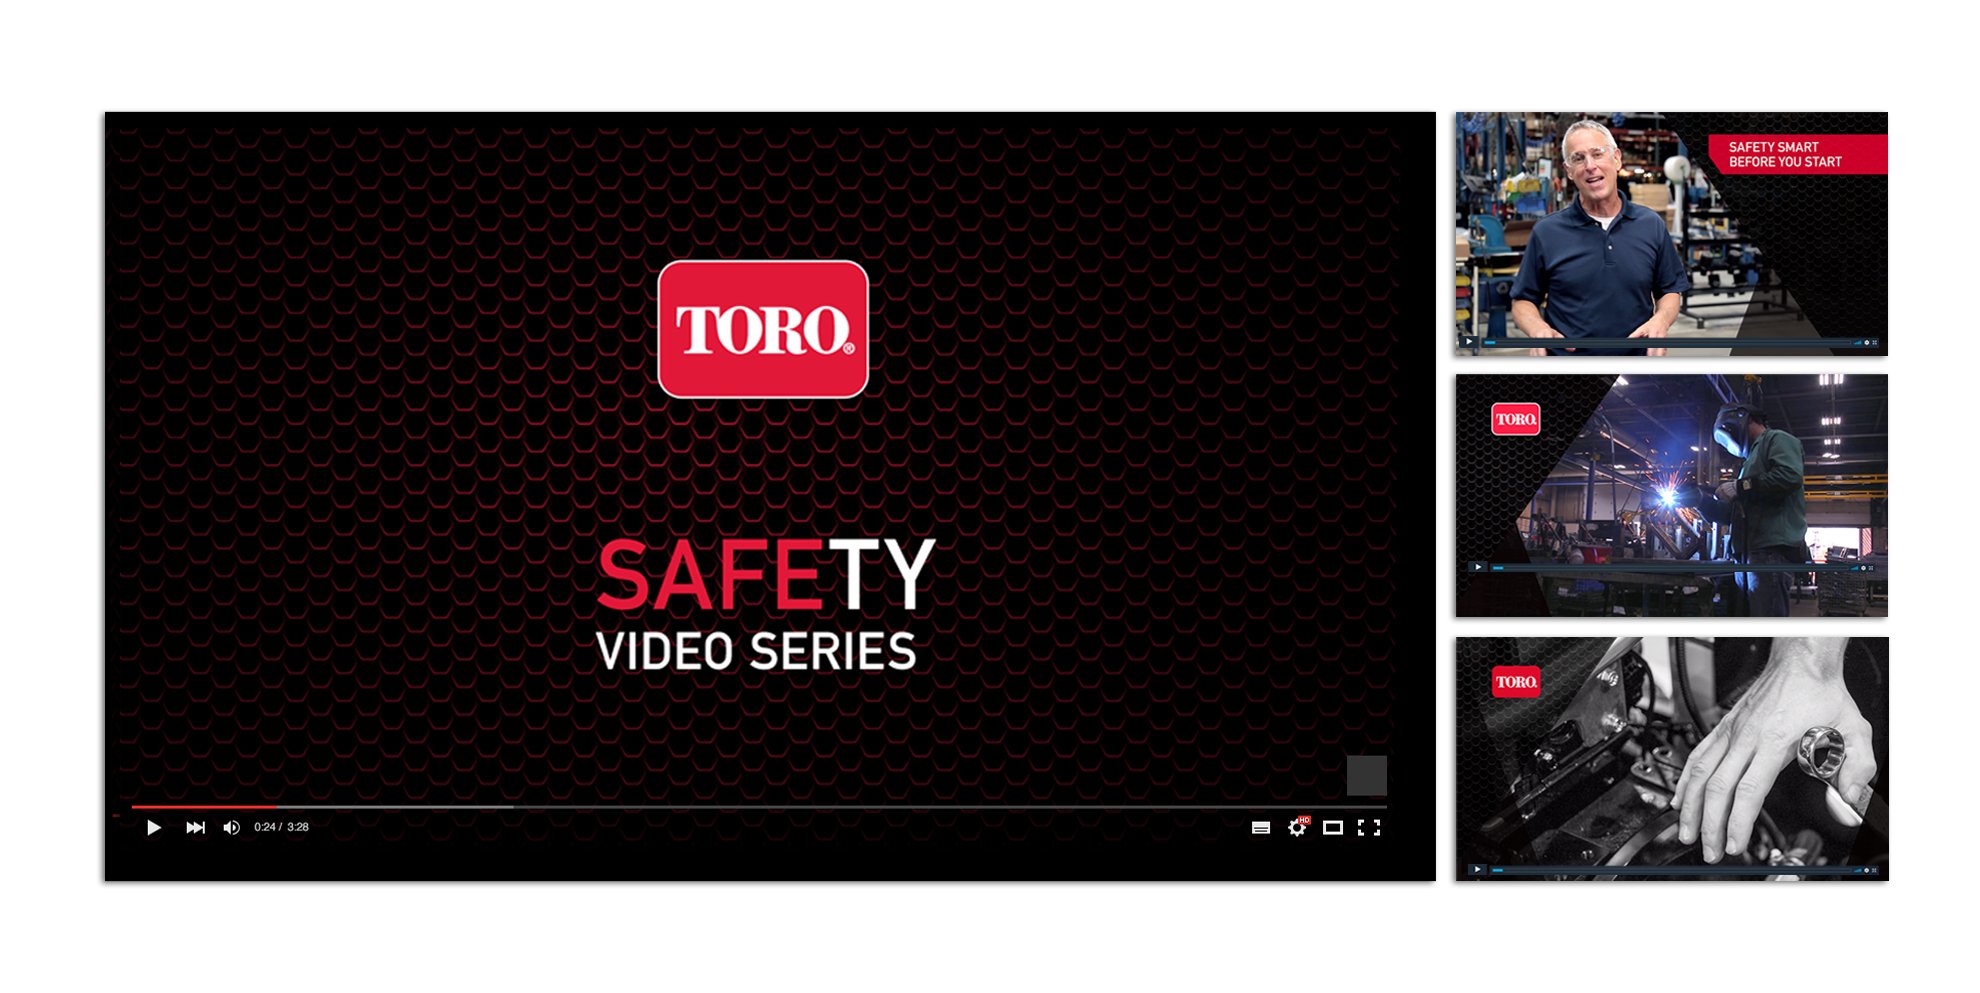 Four full-color stills from the Toro safety video series showing title card, narrator and employees working on Toro equipment